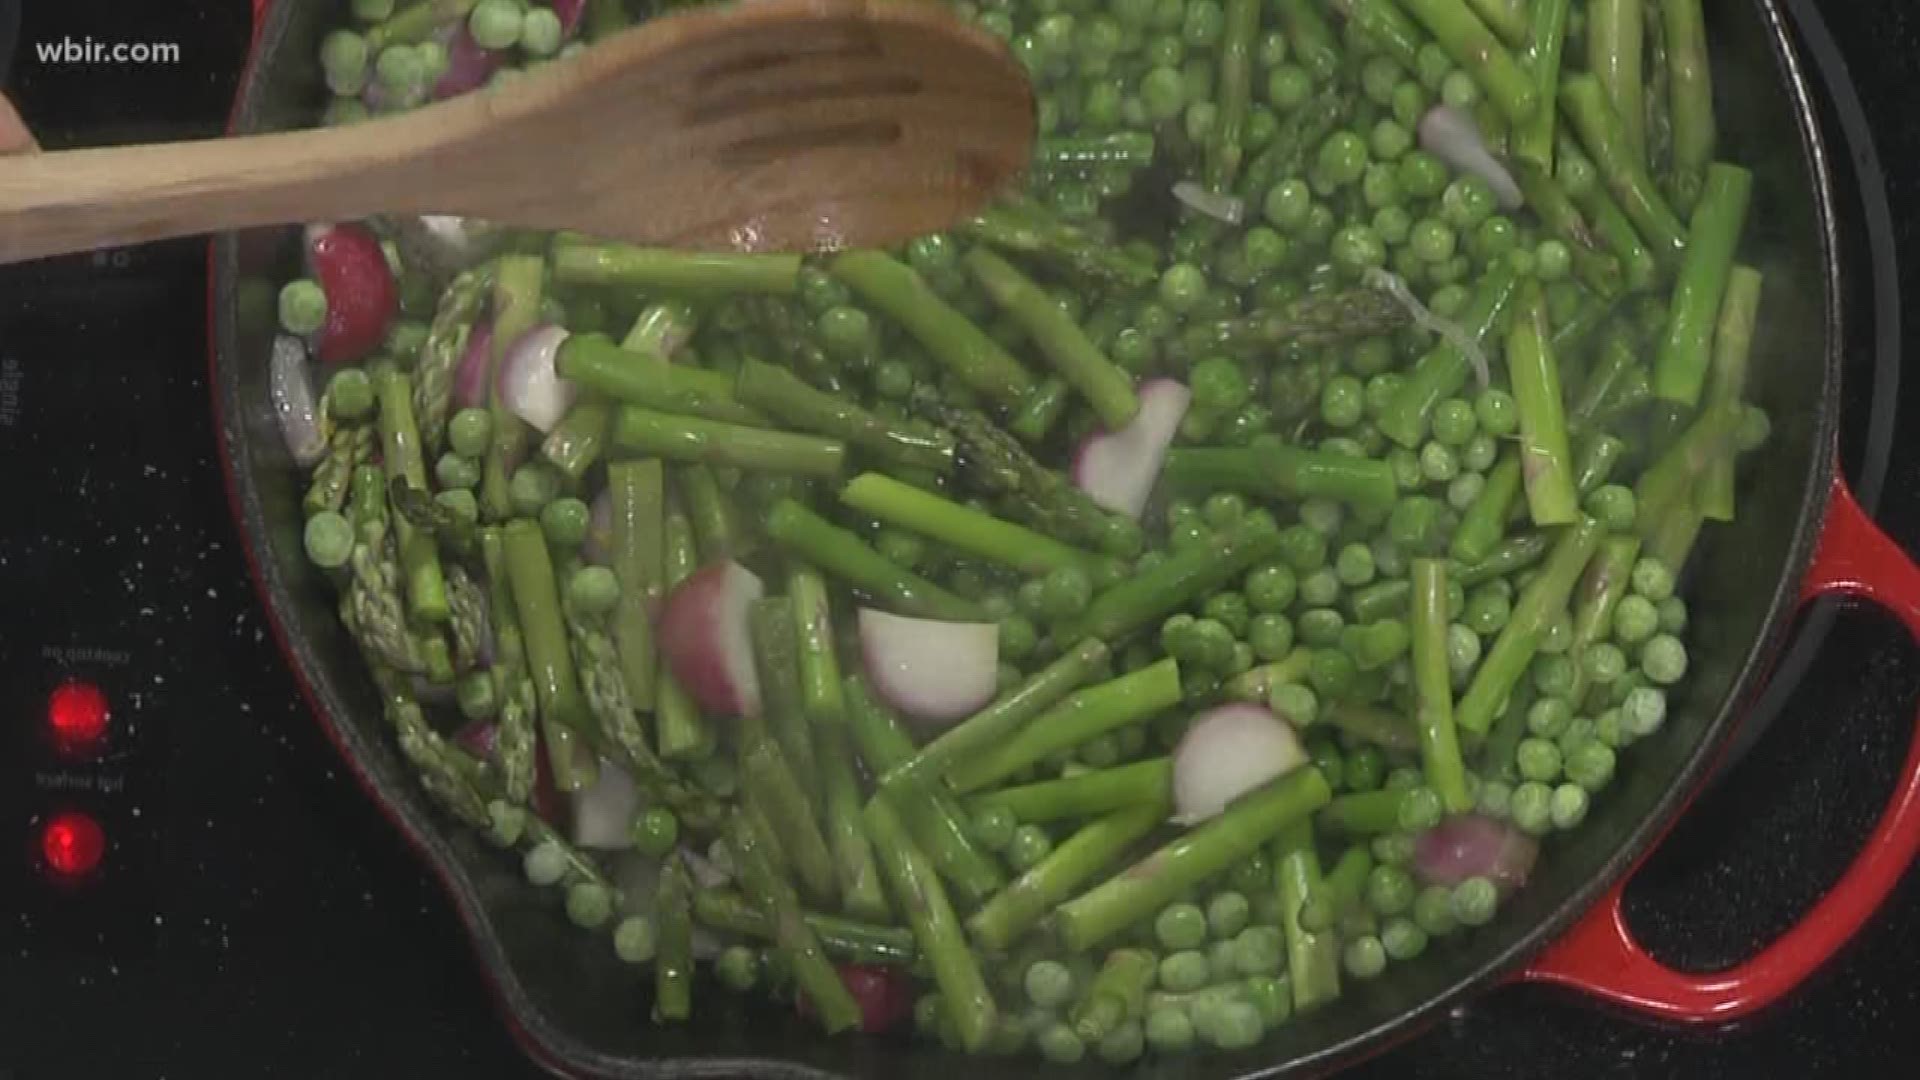 Camille Watson shows us how to prepare and cook spring vegetables perfect for Sunday or Easter dinner.